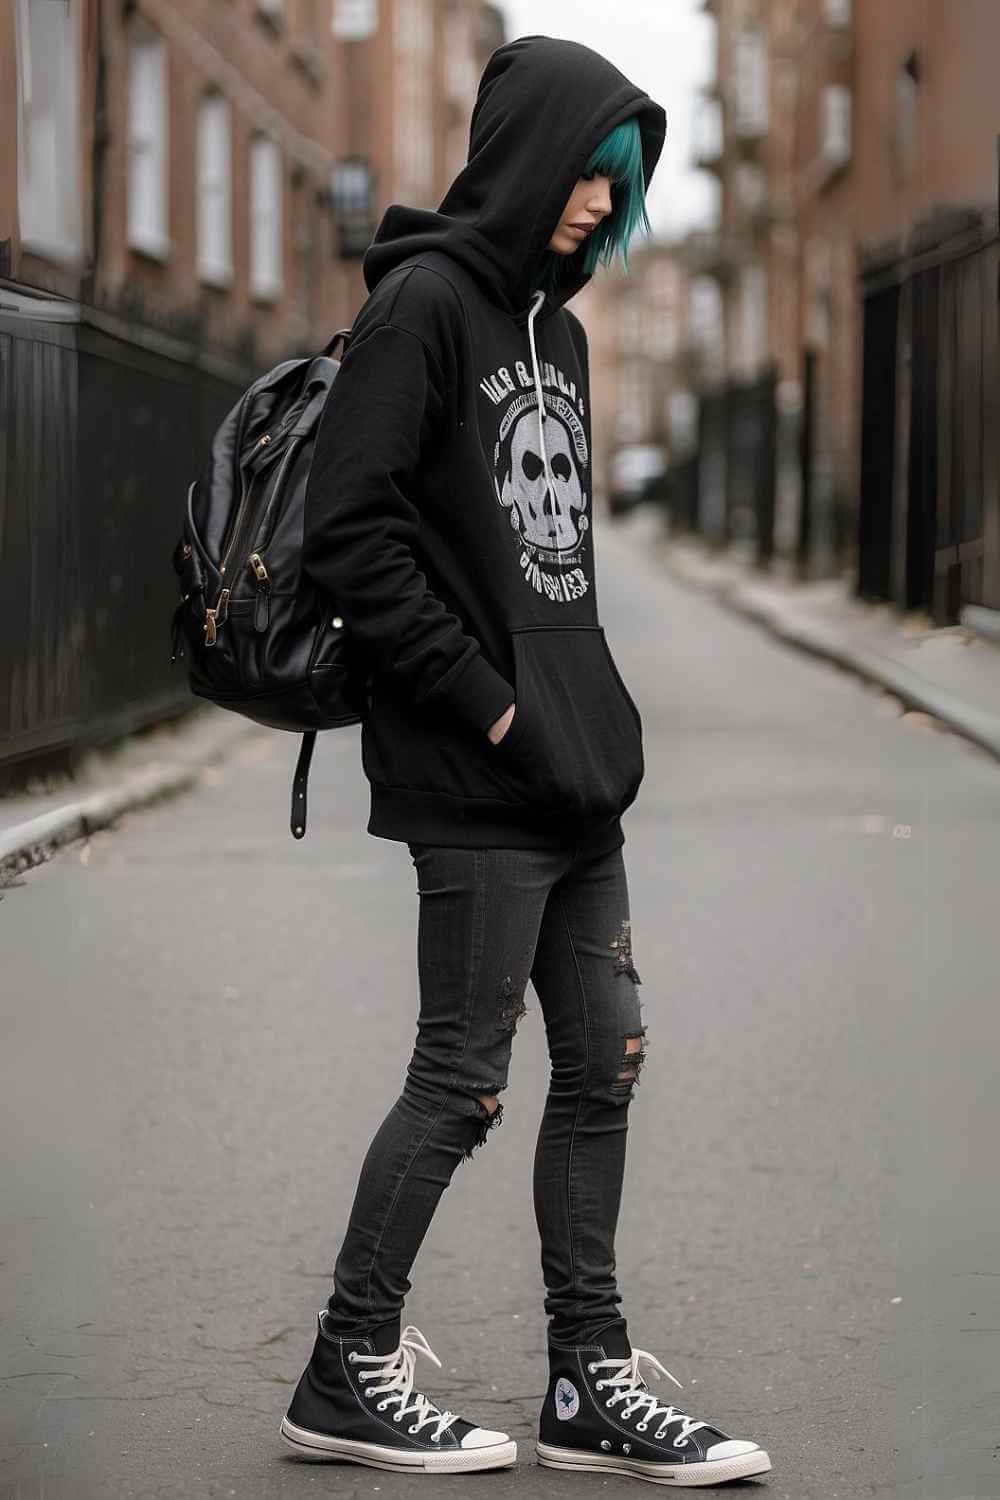 Classic Emo Outfit